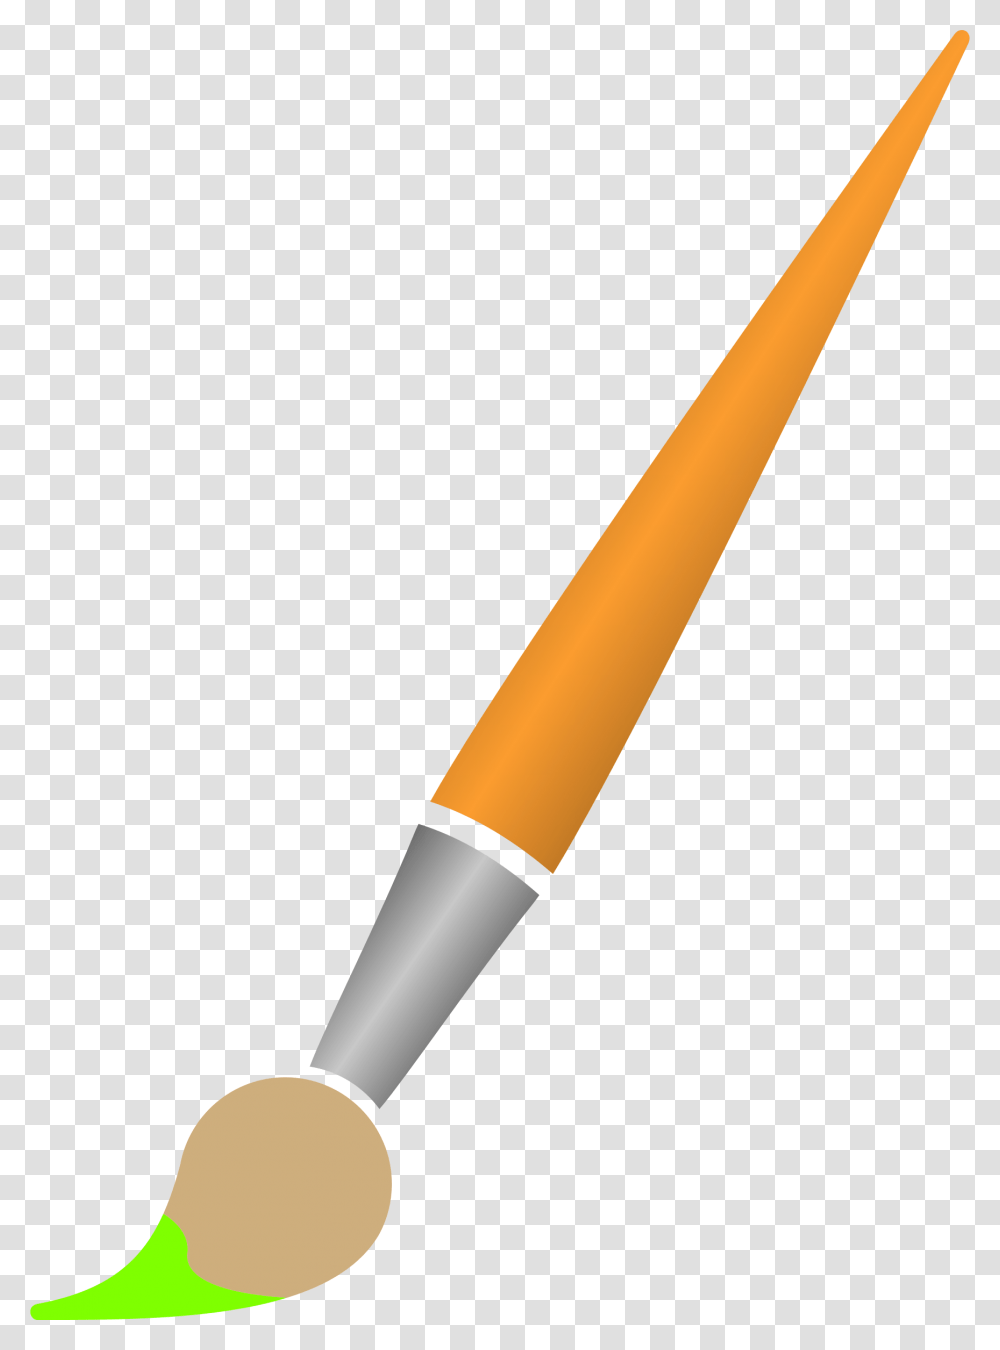 Brush And Vectors For Free Download Paint Brush Background, Tool, Toothbrush, Baseball Bat, Team Sport Transparent Png